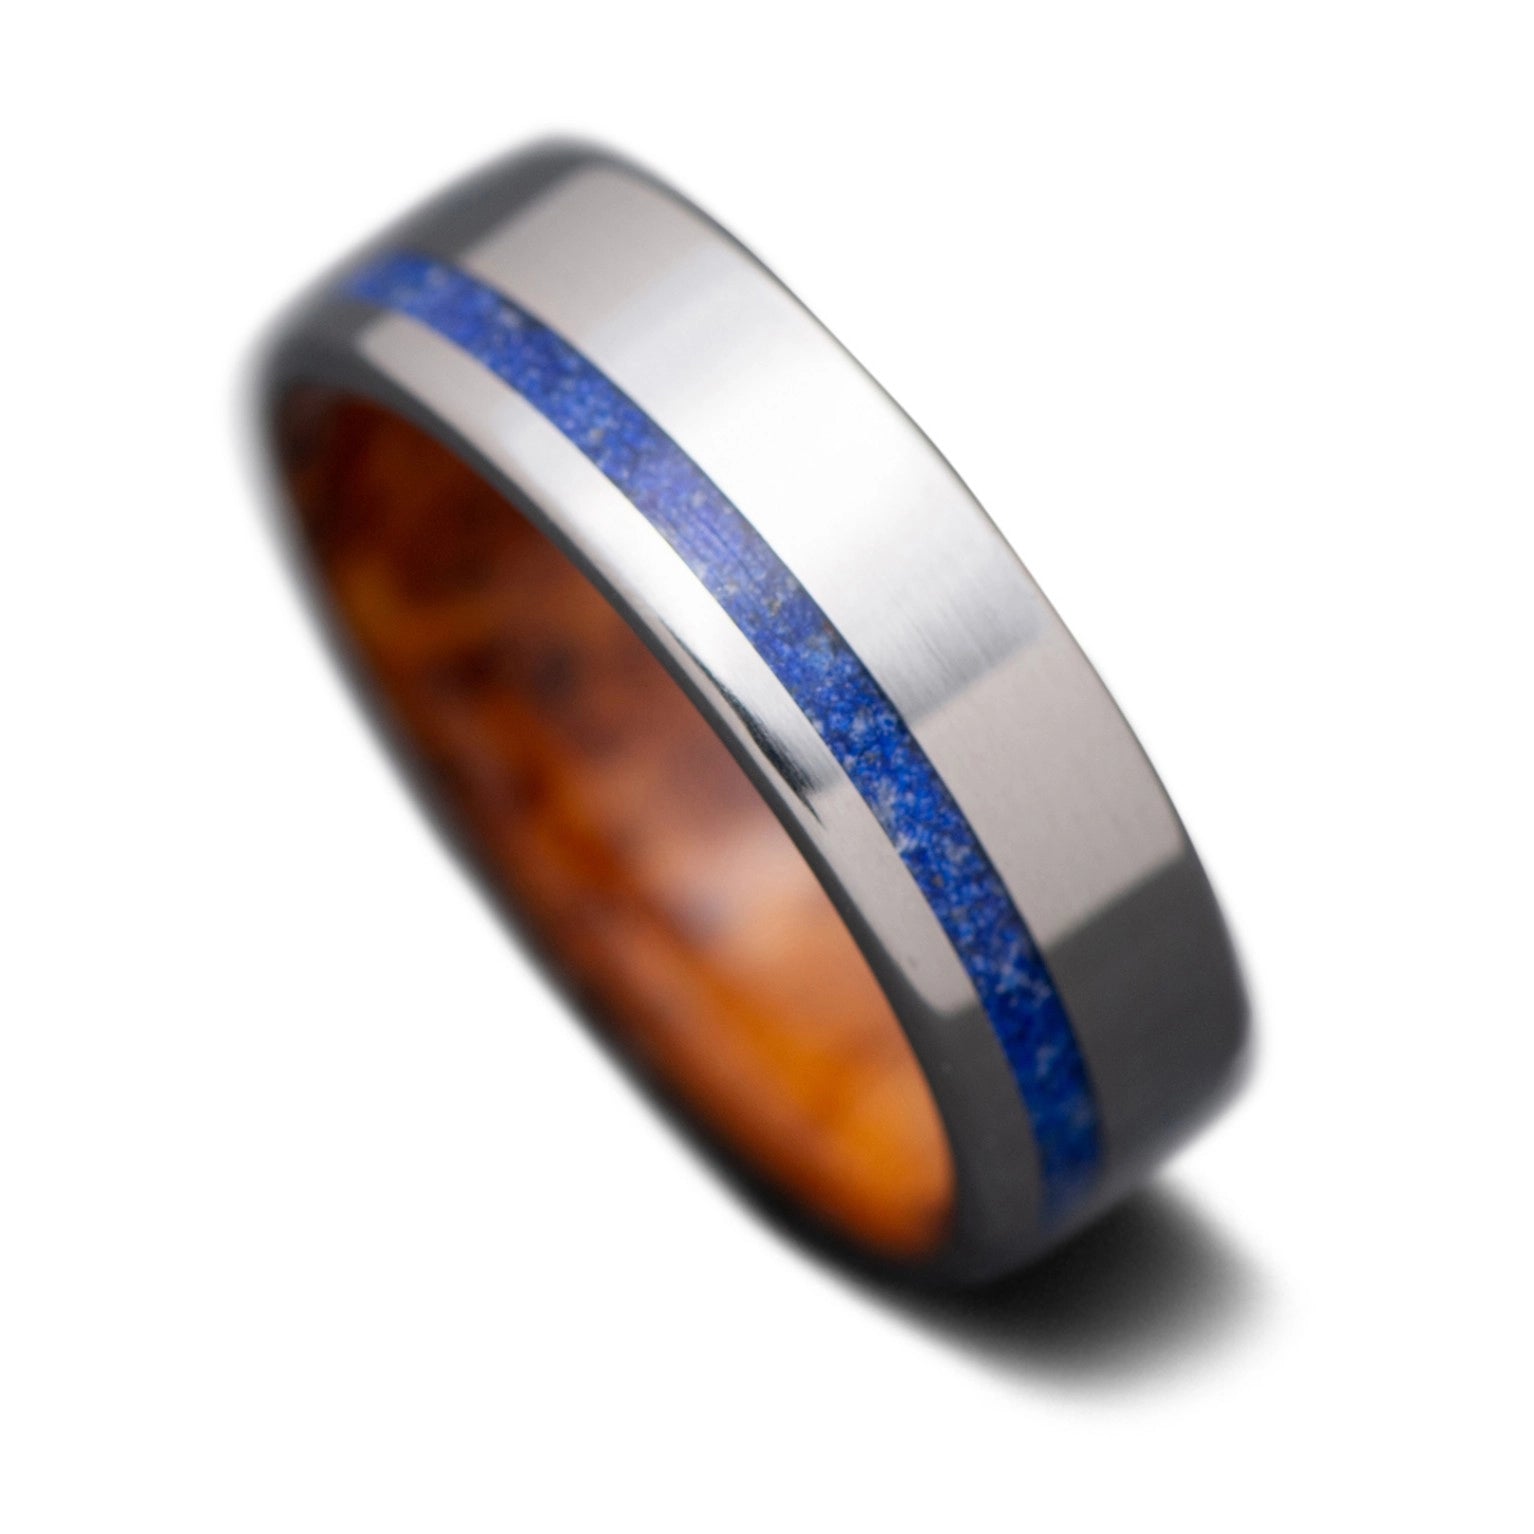  Titanium Core Ring with Lapis Lazuli inlay and  Amboyna inner sleeve, 7mm -THE SHIFT